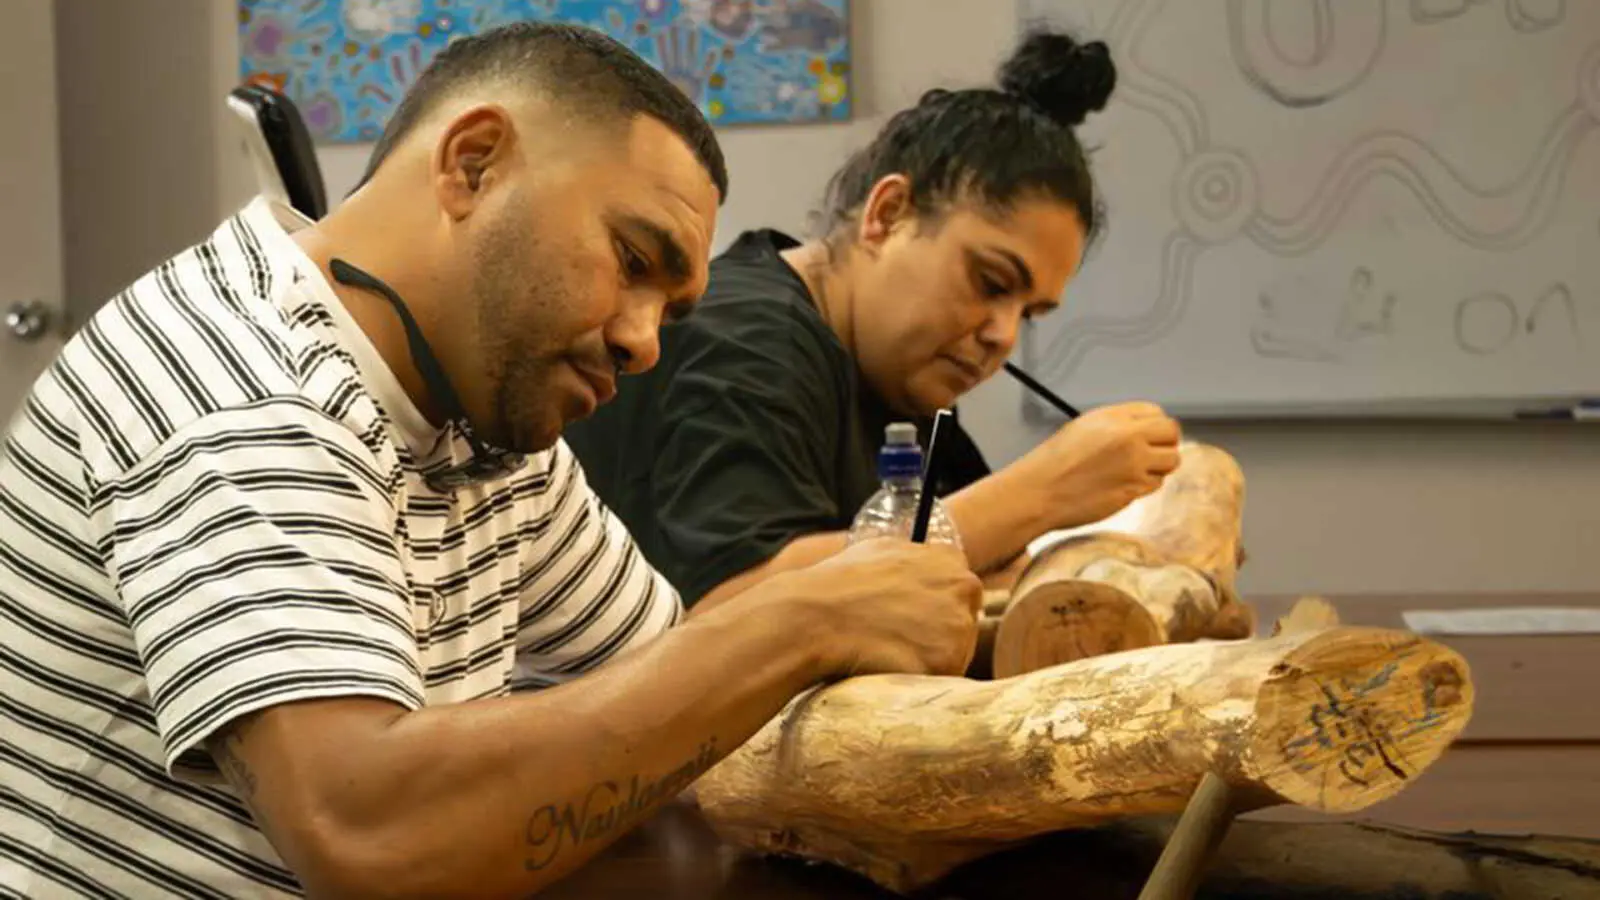 An Indigenous woman and man sitting at a table drawing on logs with pencils